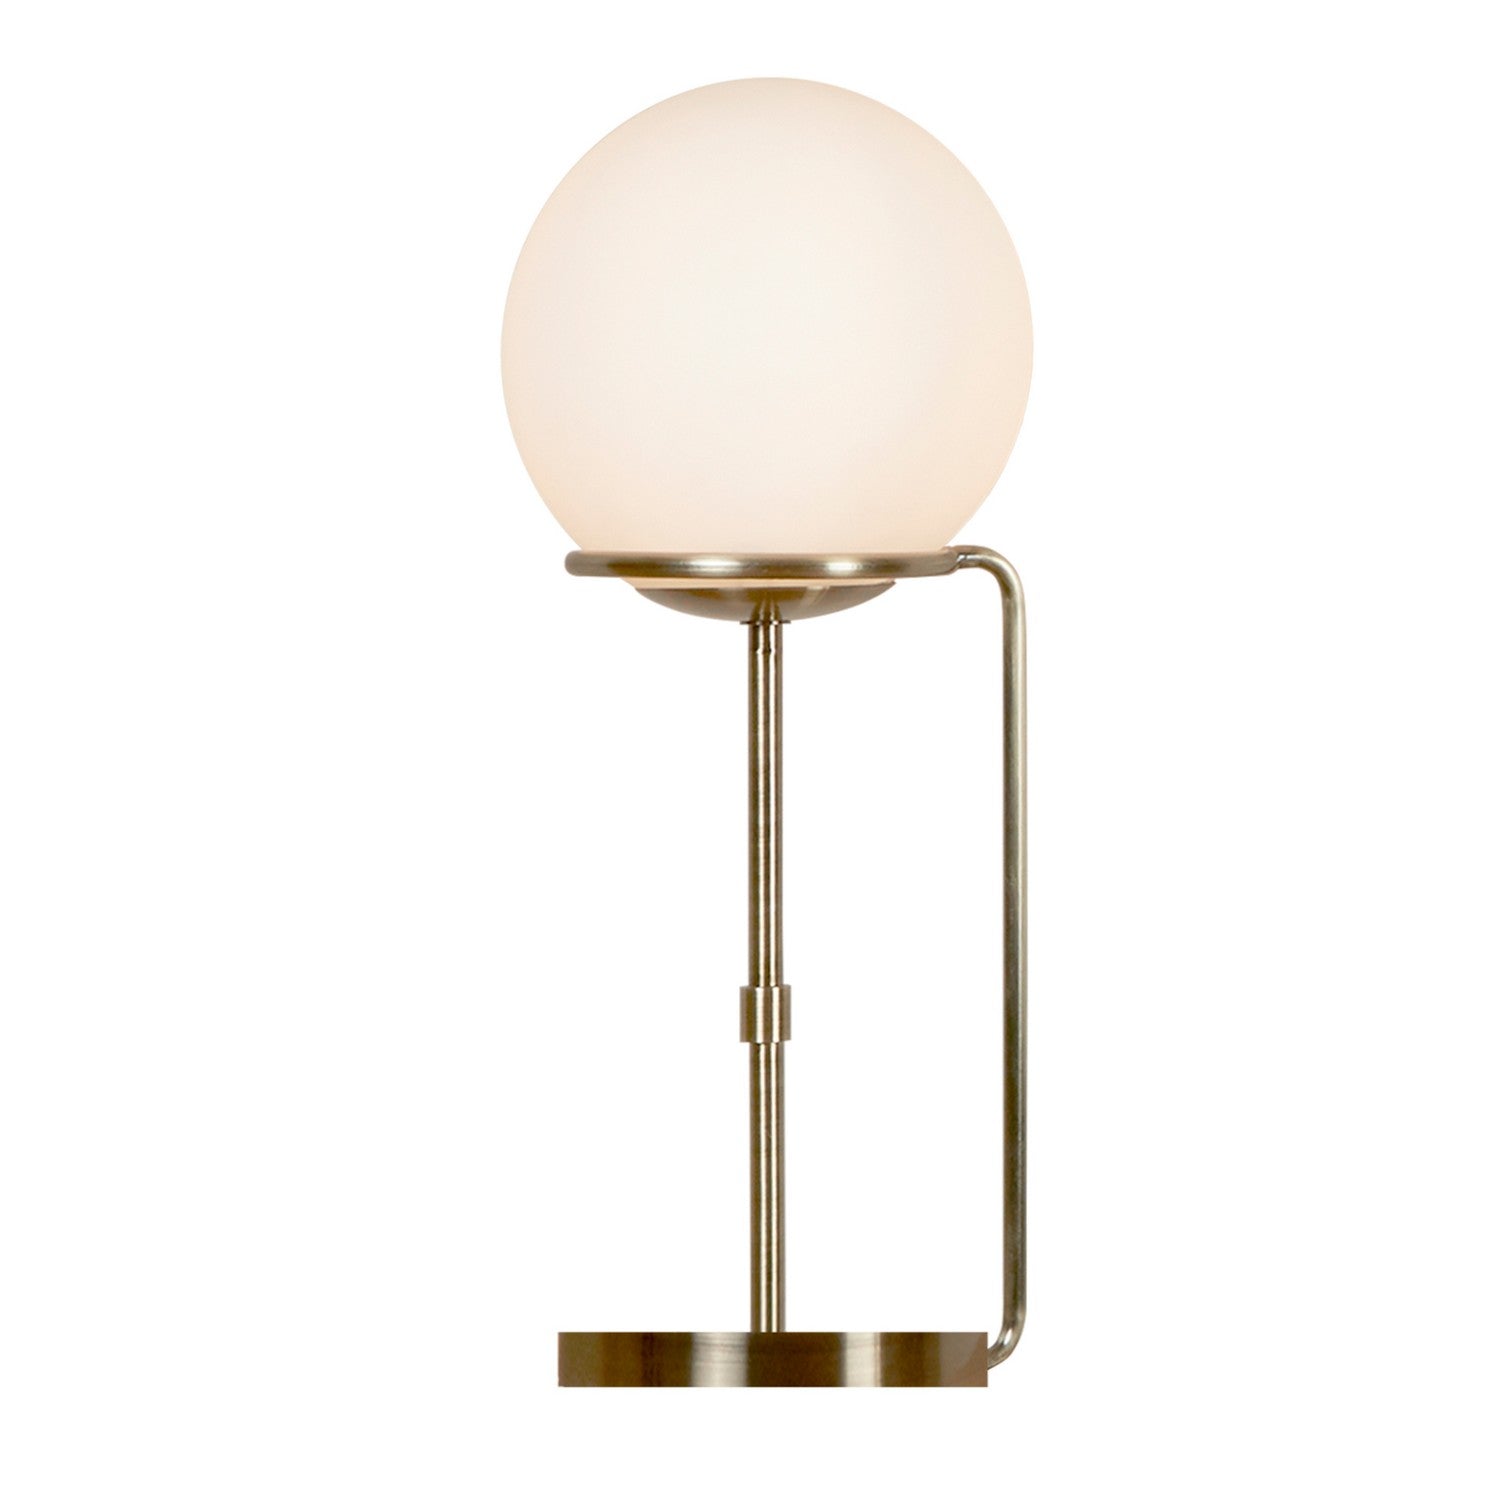 Sphere Antique Brass & Opal Glass Shade Table Lamp